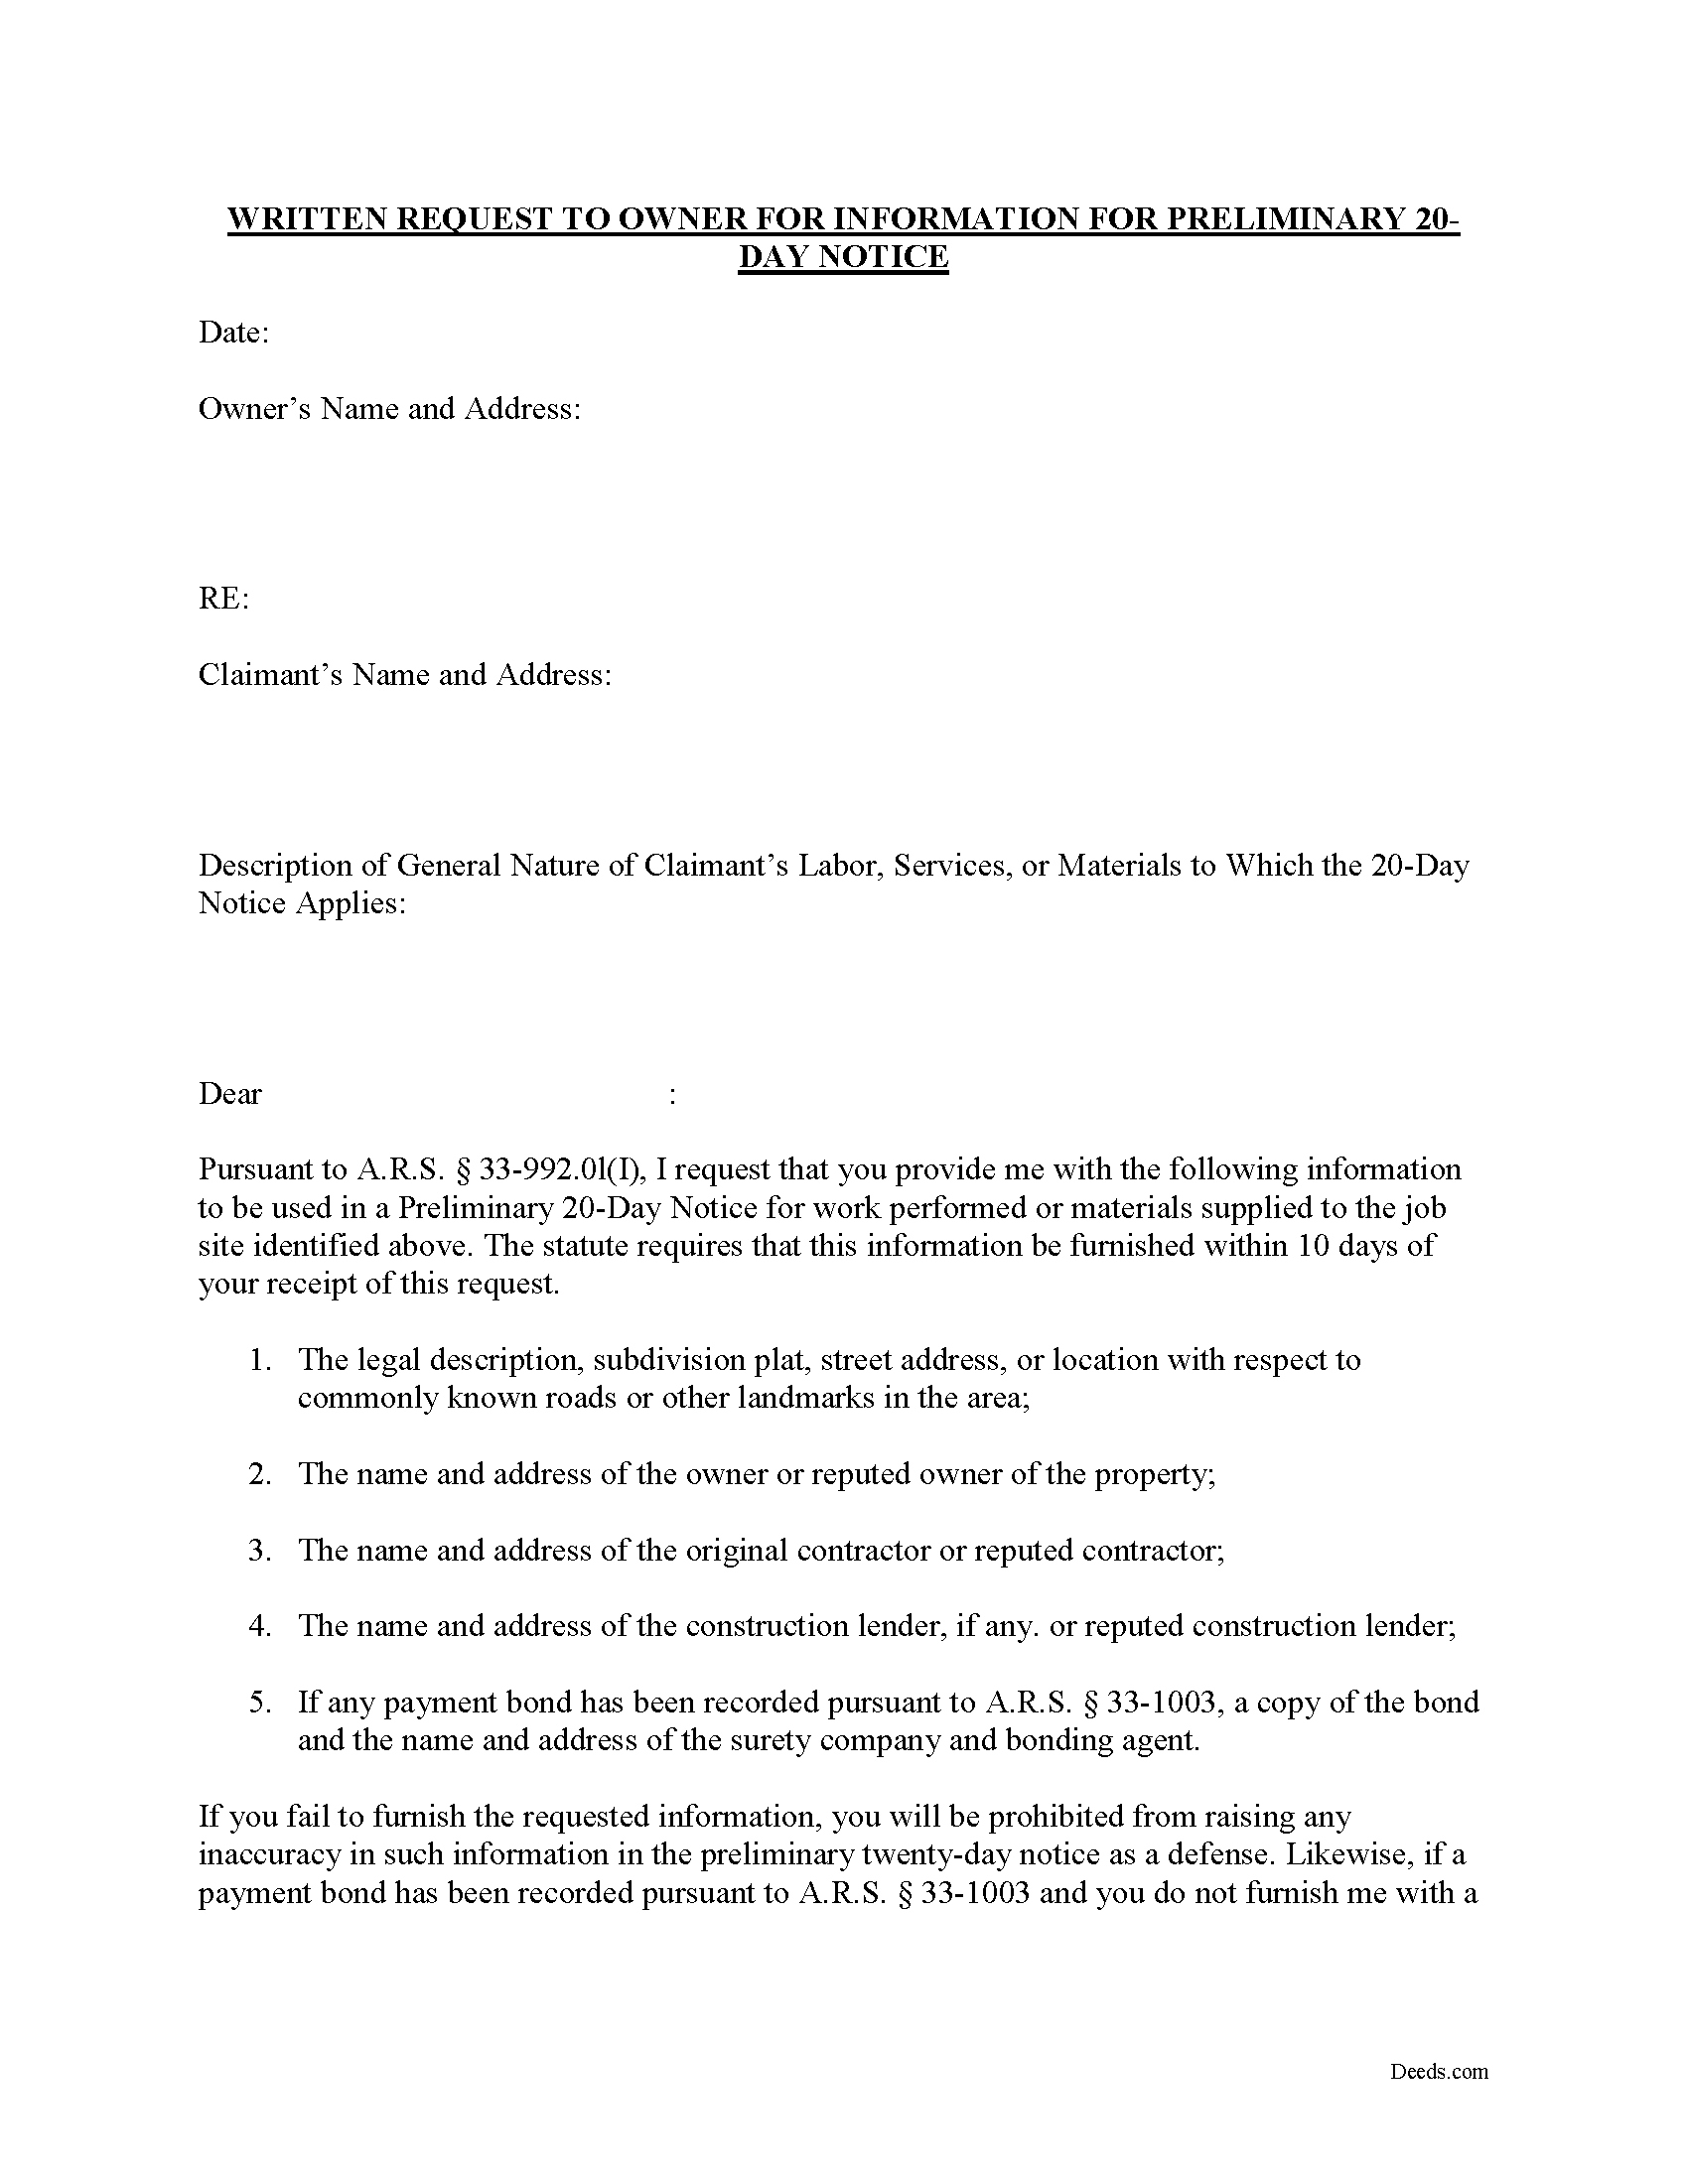 Written Request for Information Form